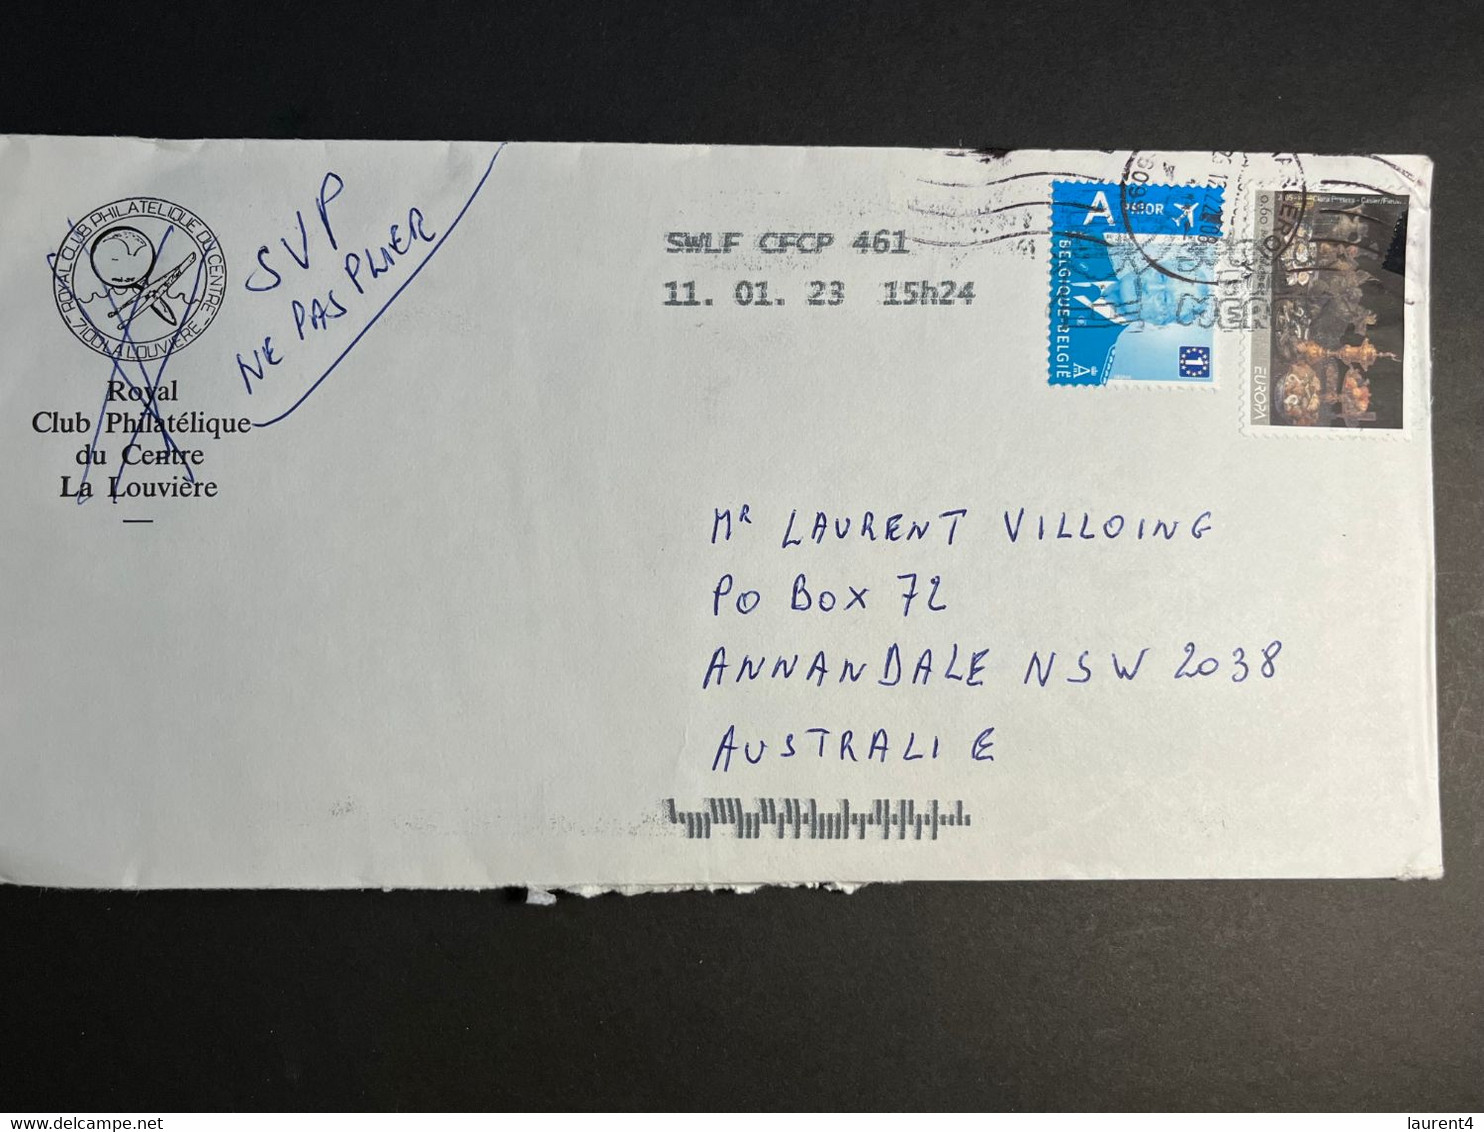 (1 N 49) Letter Posted From Belgium To Australia (during COVID-19 Pandemic) With EUROPA Stamp - Covers & Documents